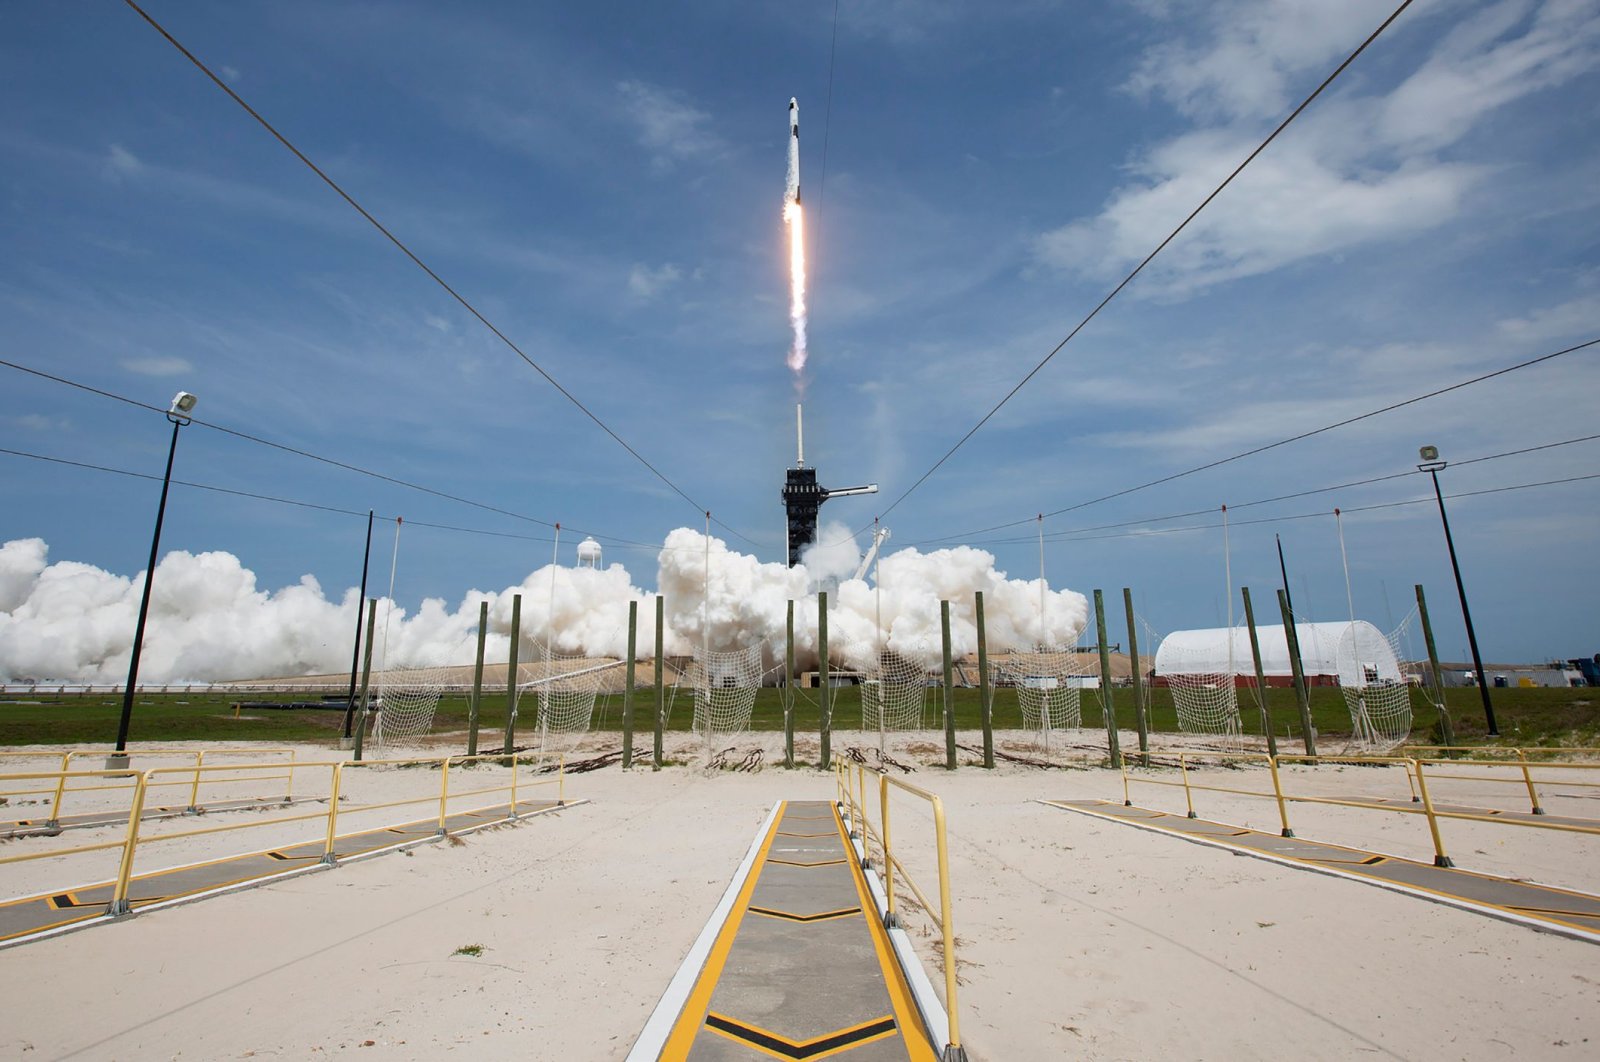 This NASA photo obtained May 31, 2020 shows a SpaceX Falcon 9 rocket carrying the company's Crew Dragon spacecraft launched from Launch Complex 39A on NASA’s SpaceX Demo-2 mission to the International Space Station with NASA astronauts Robert Behnken and Douglas Hurley onboard, at 3:22 p.m. EDT on May 30, 2020, at NASA’s Kennedy Space Center in Florida. (AFP Photo)